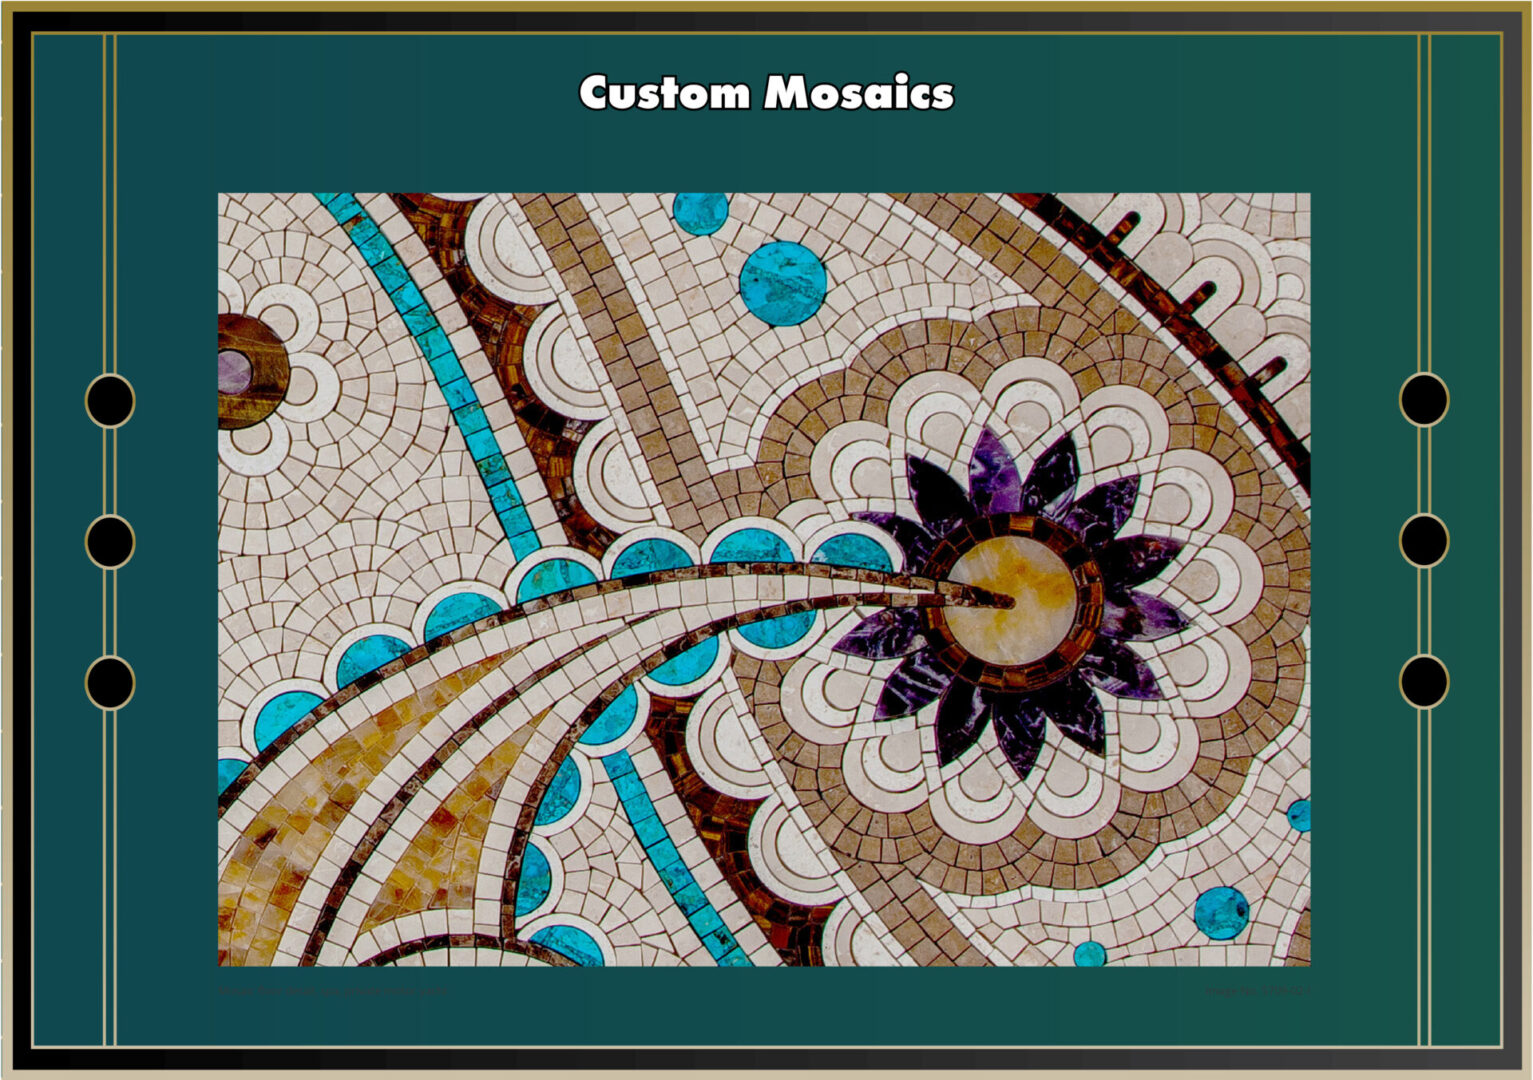 Custom Mosaics available in vibrant colors